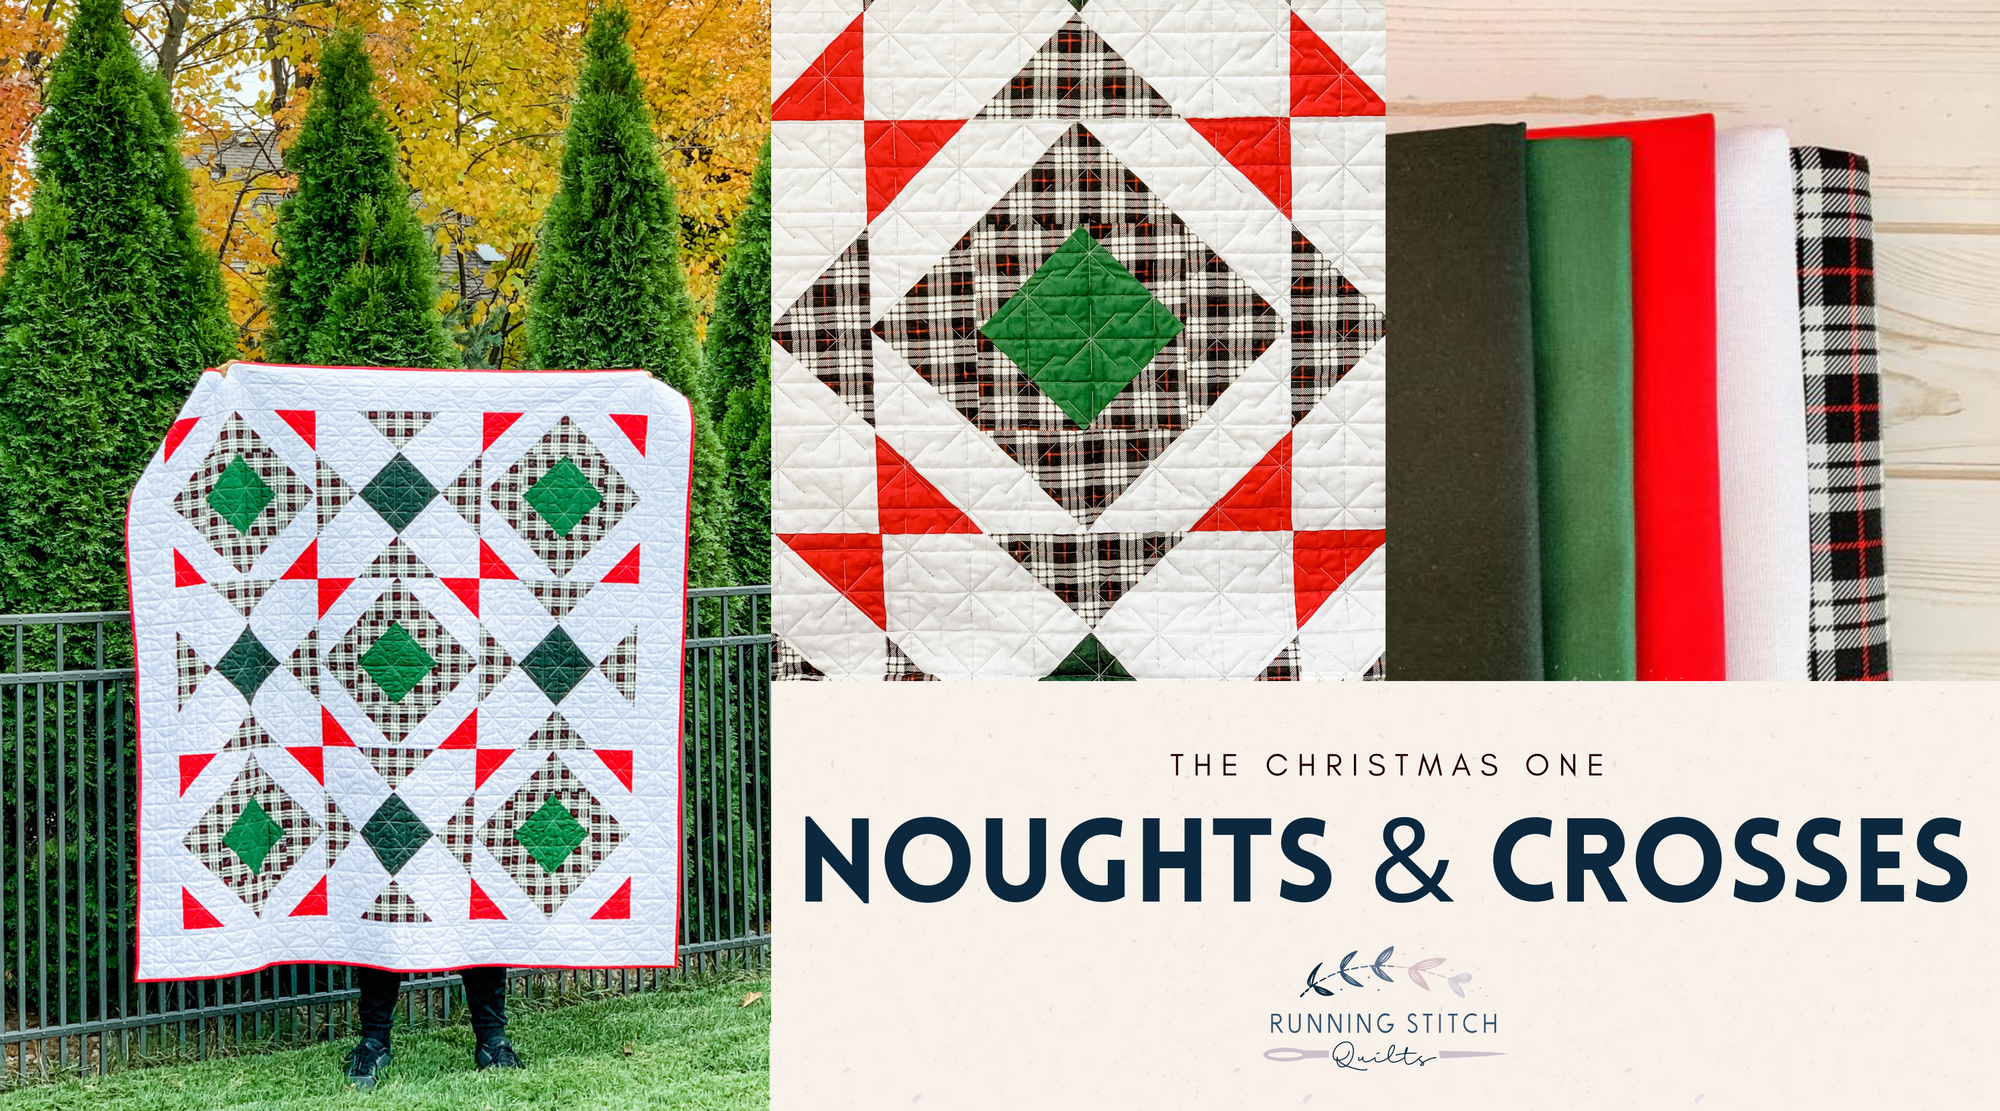 Noughts and Crosses - The Christmas One